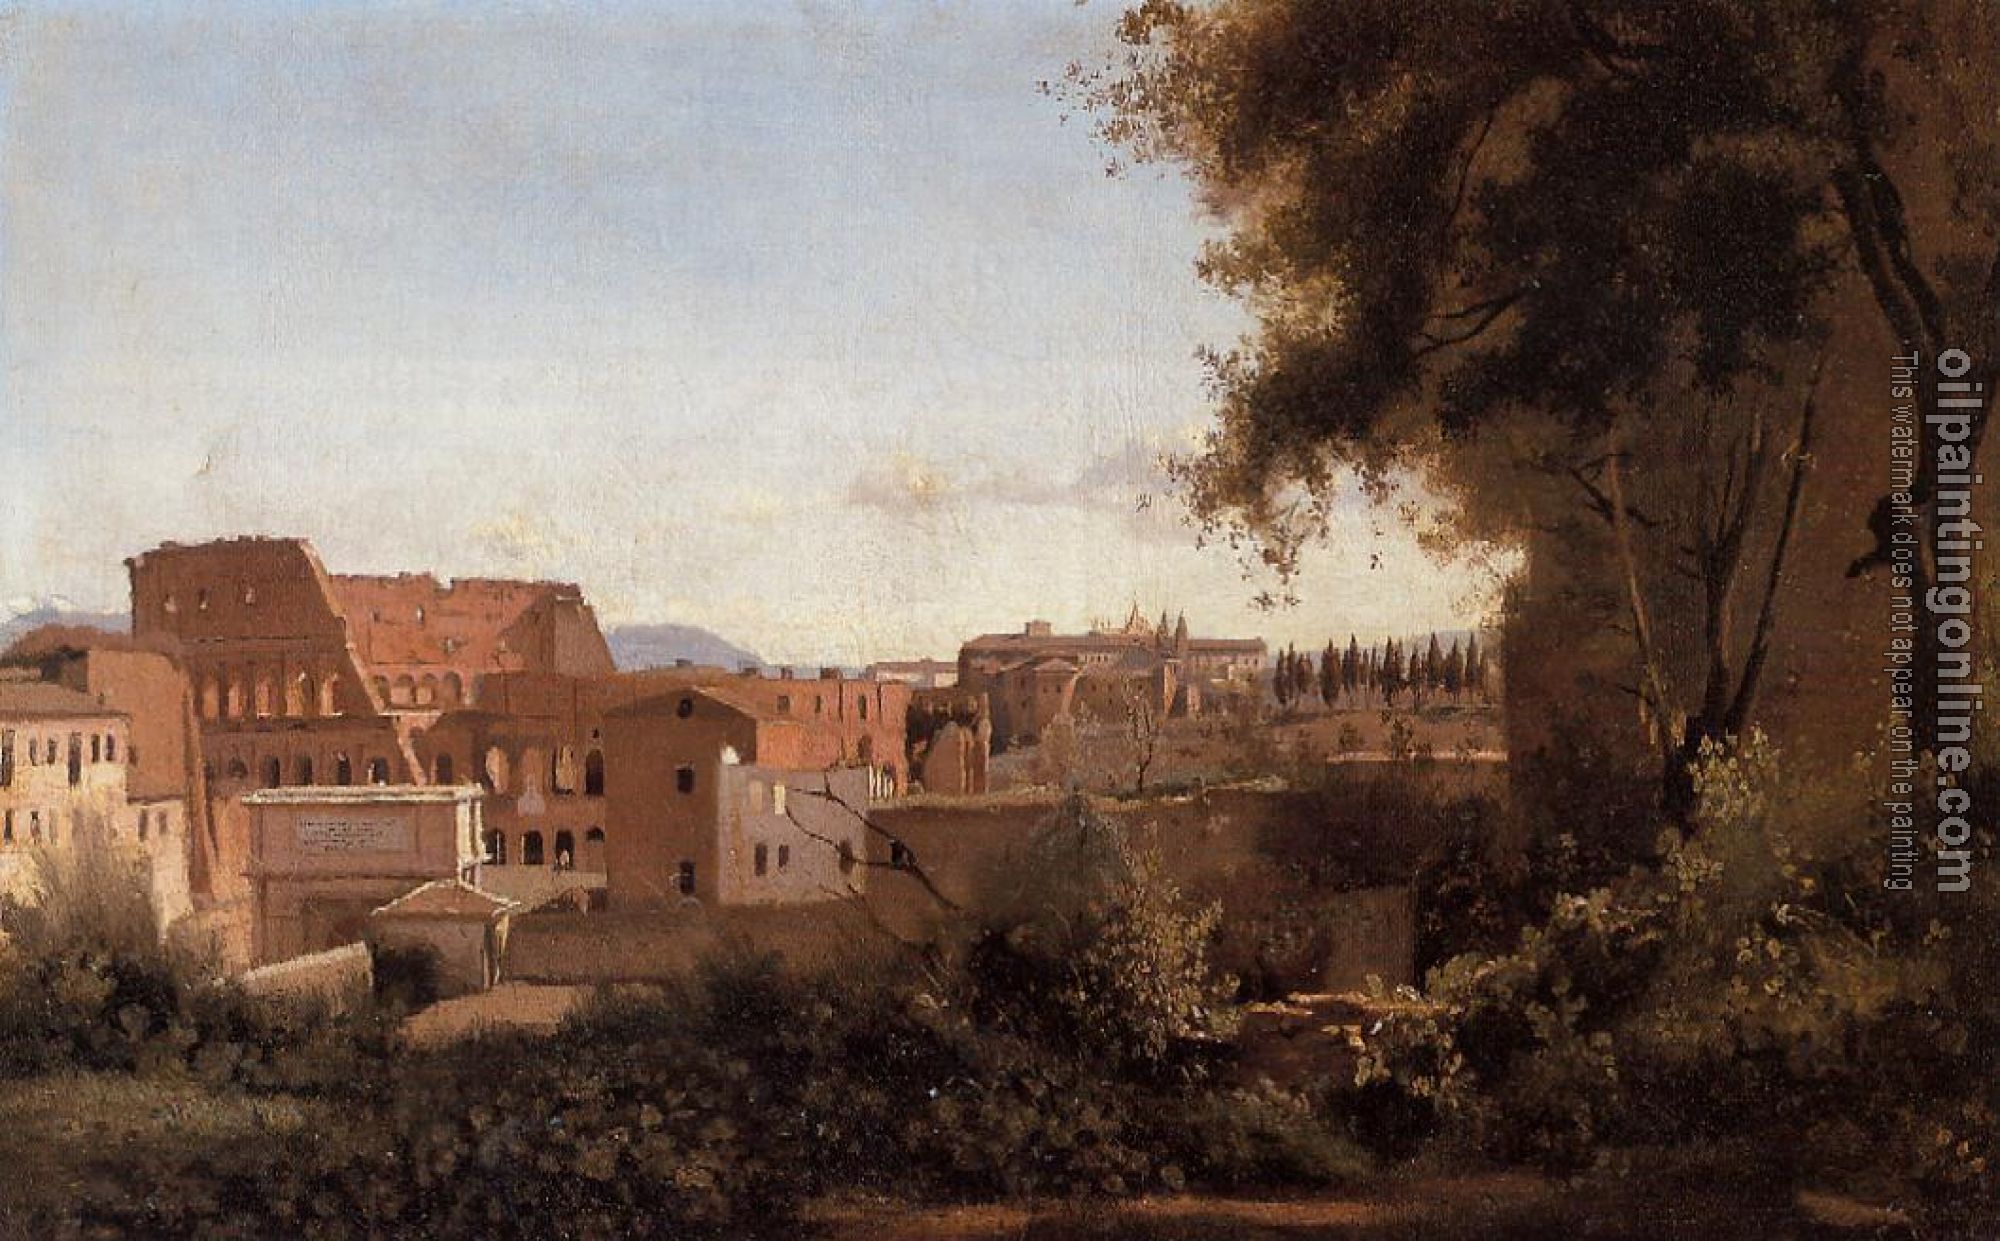 Corot, Jean-Baptiste-Camille - Rome - View from the Farnese Gardens, Noon( Study of the Coliseum)